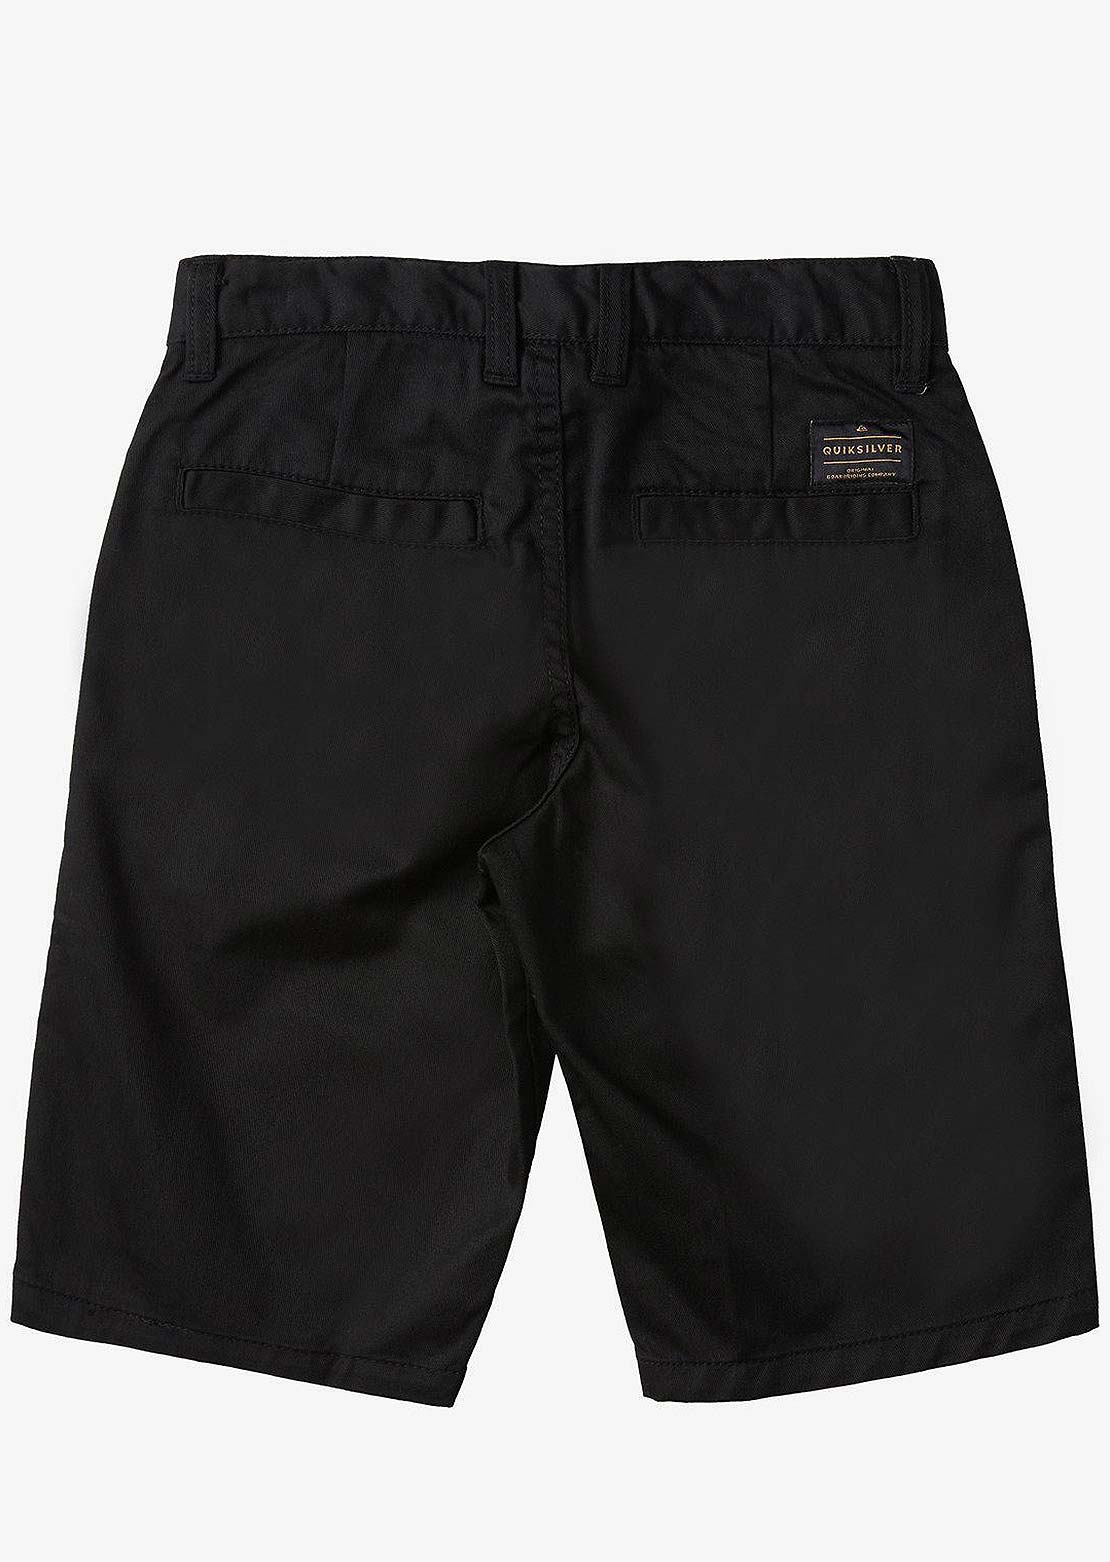 Quiksilver Toddler Everyday Union Stretch Shorts Black